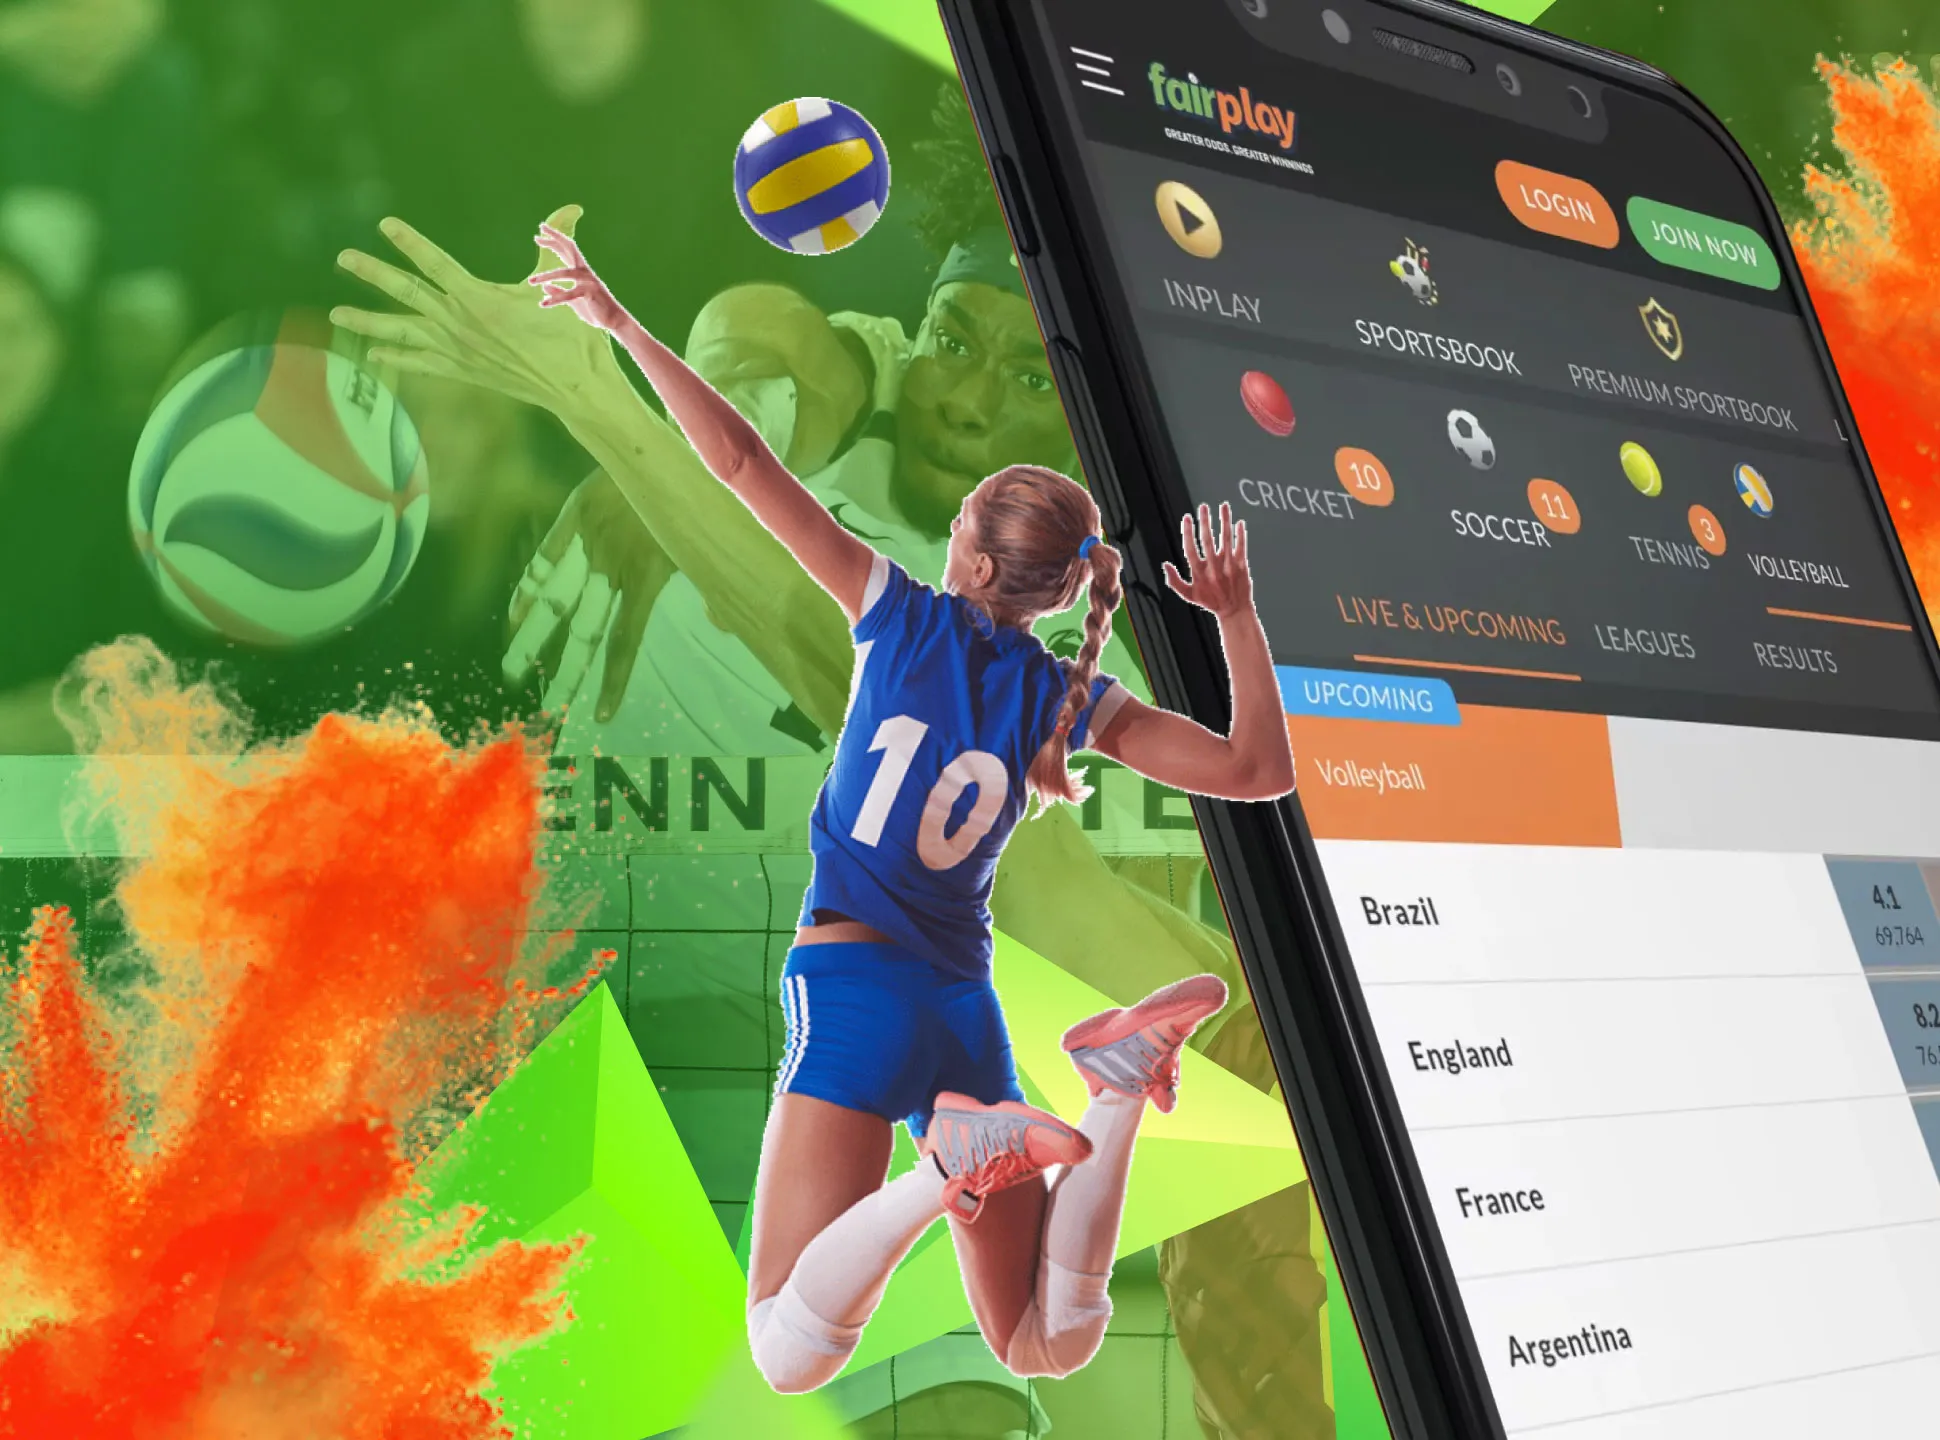 Download the Fairplay mobile app to place bets on volleyball via your smartphone.